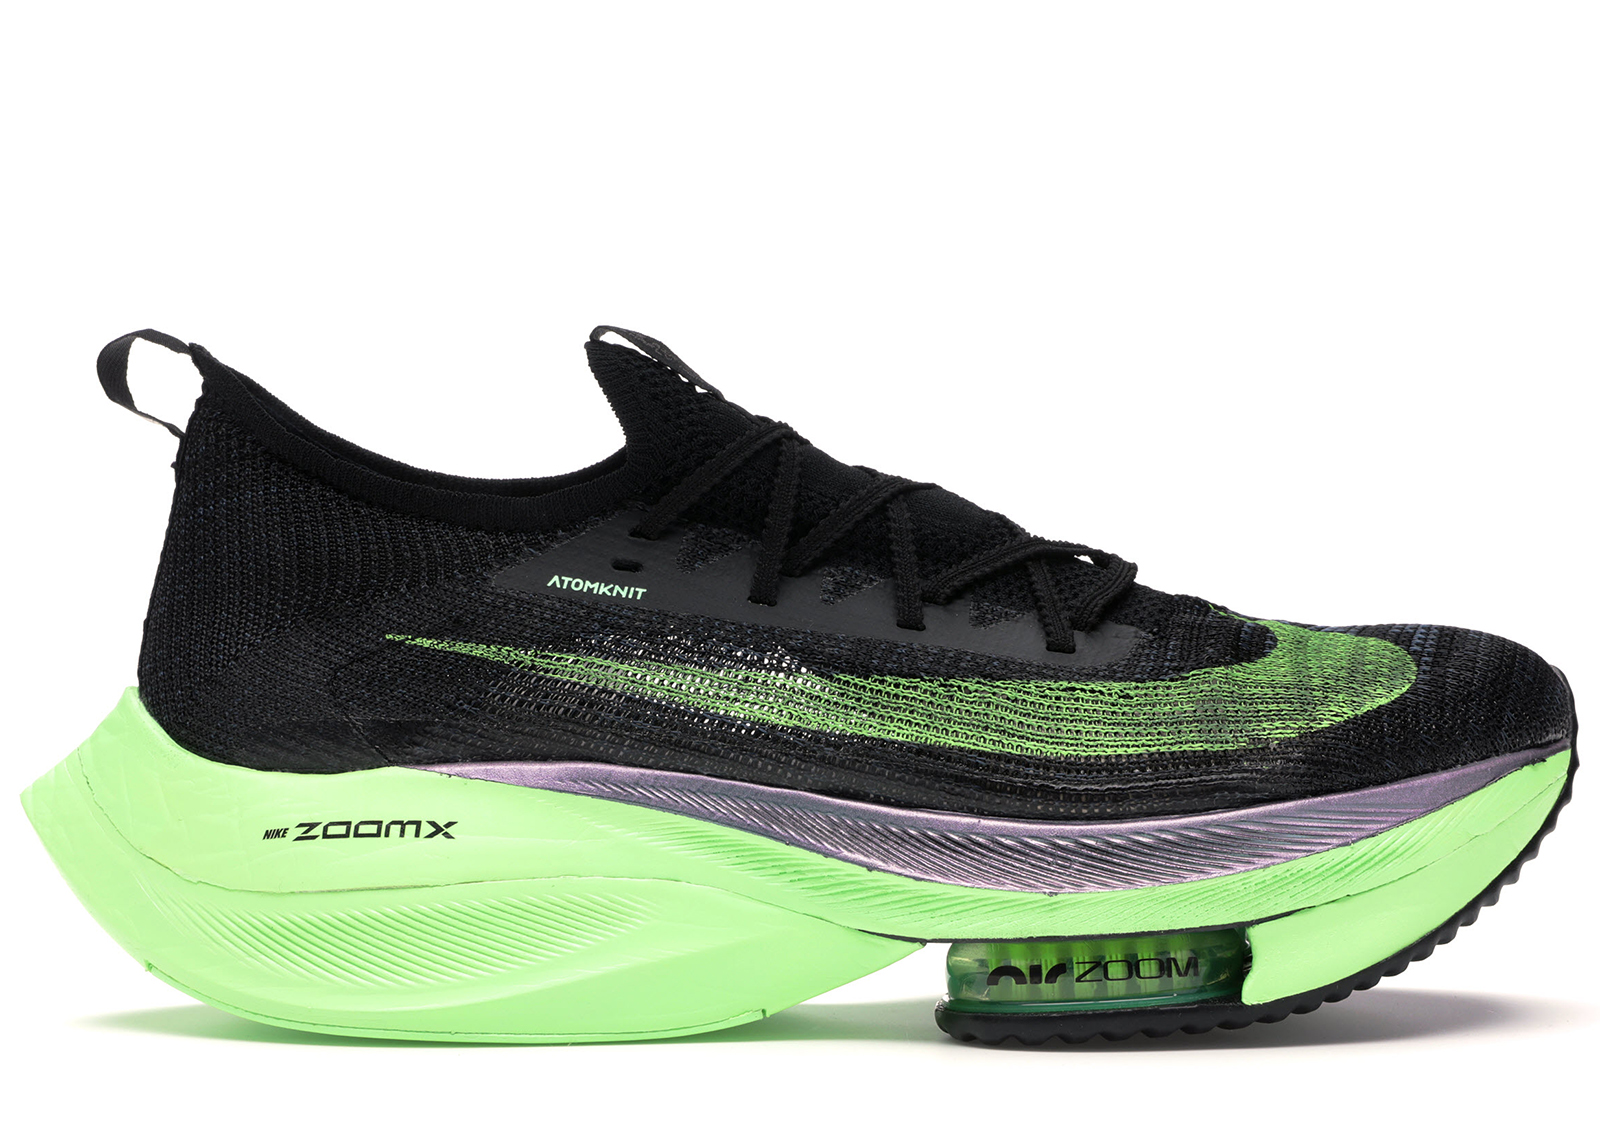 Nike Air Zoom Alphafly Next% Black Electric Green